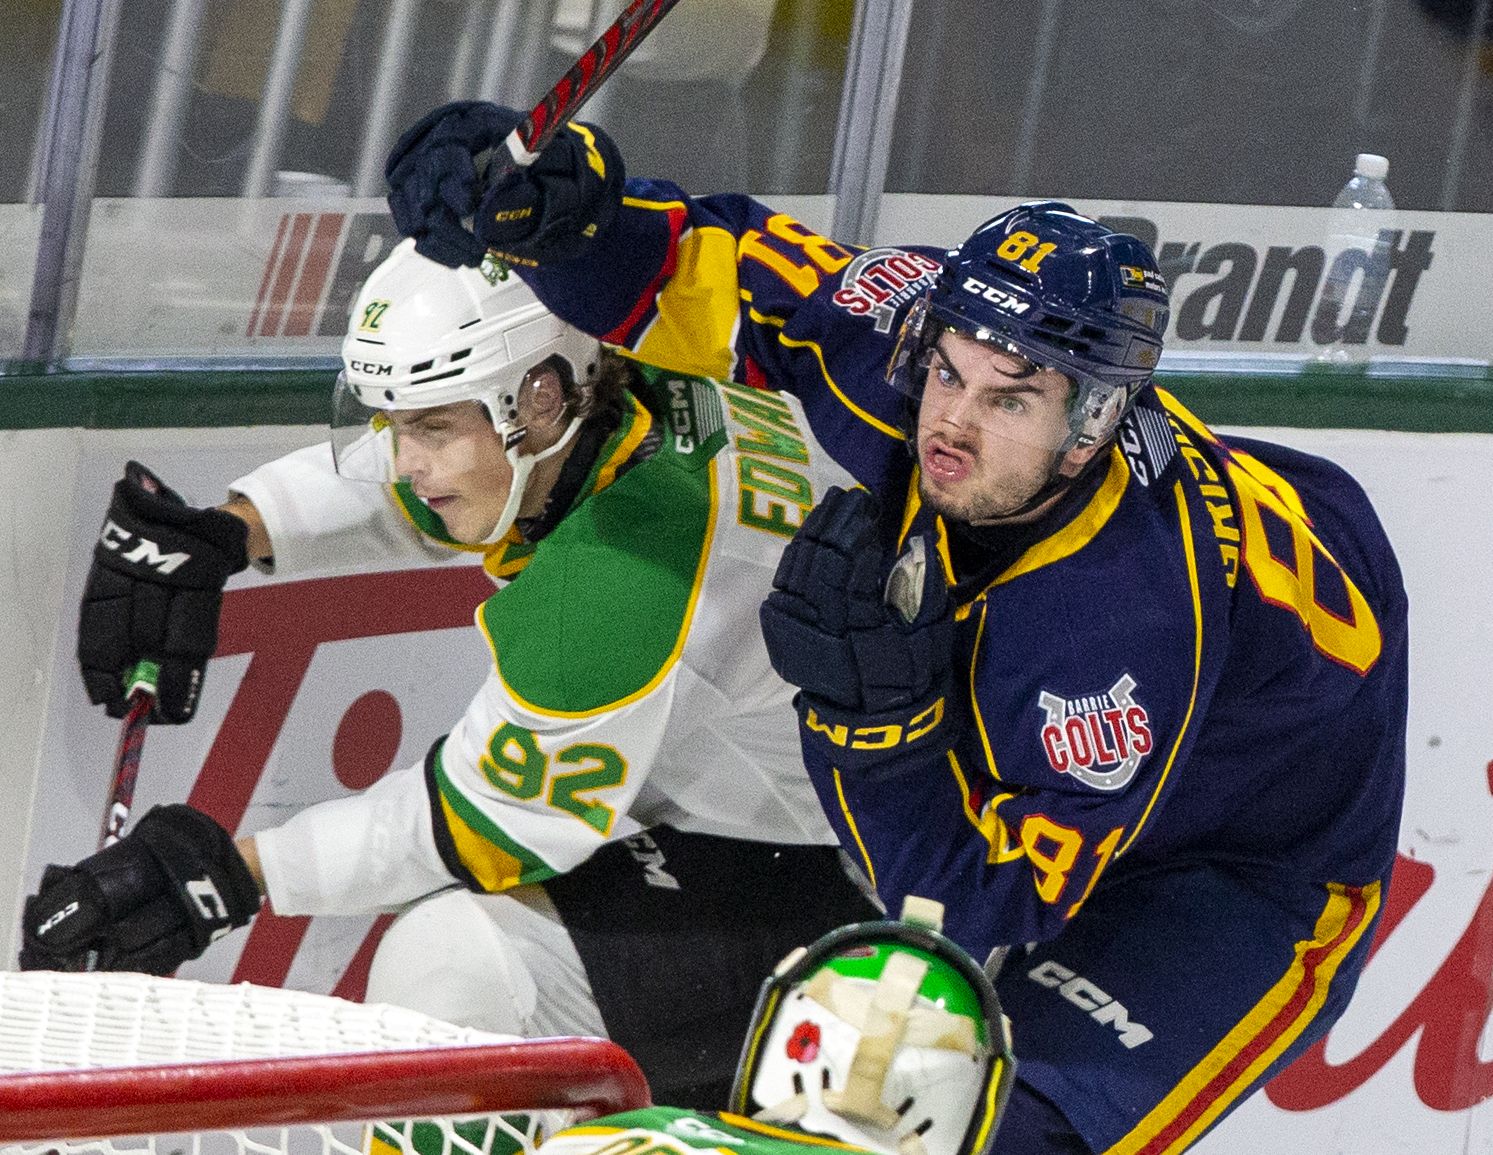 April 2nd 2022, Barrie Colts Beat the London Knights 5-4 in